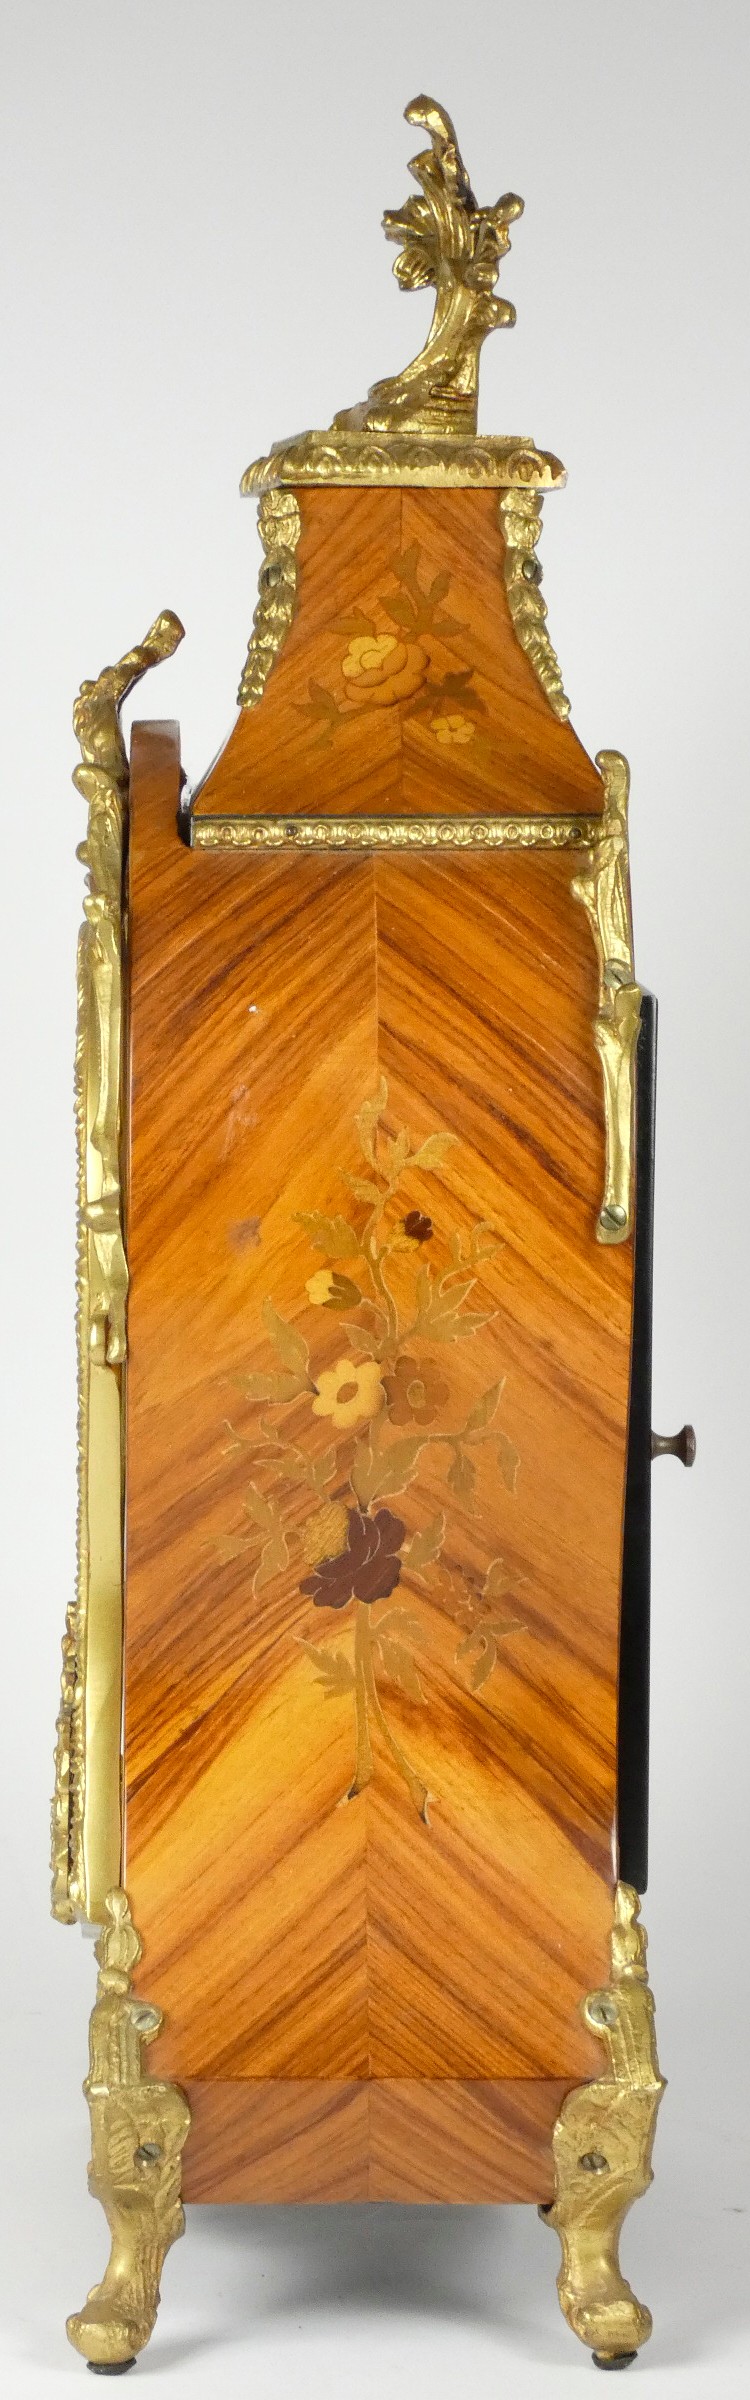 A late 19th century Louis XVI style Boule mantel clock, inlaid walnut case with applied embossed - Image 3 of 5